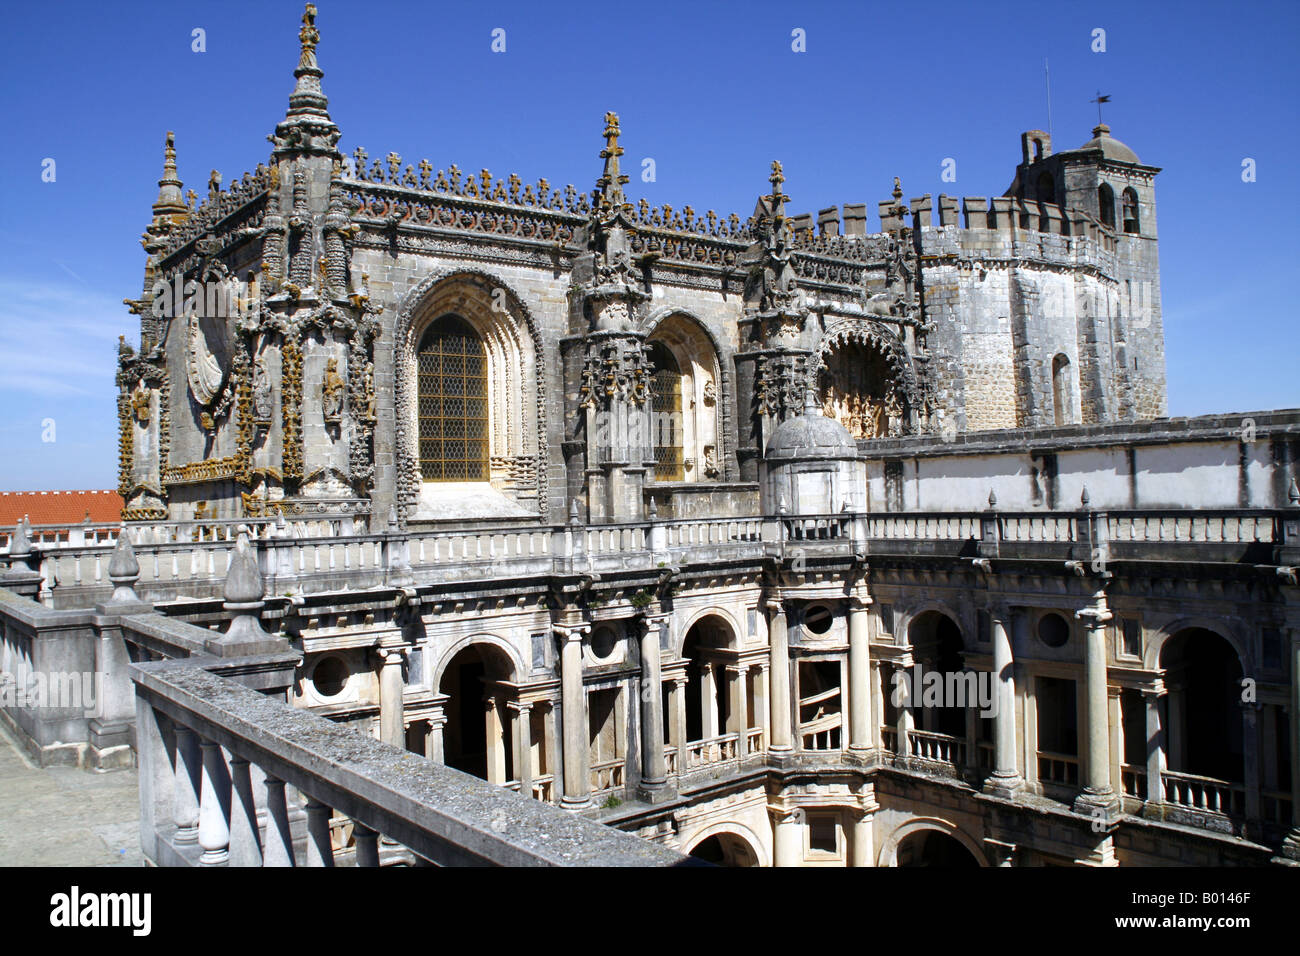 Knights Templars, Convent of the Knights of Christ, Tomar, Portugal Stock Photo